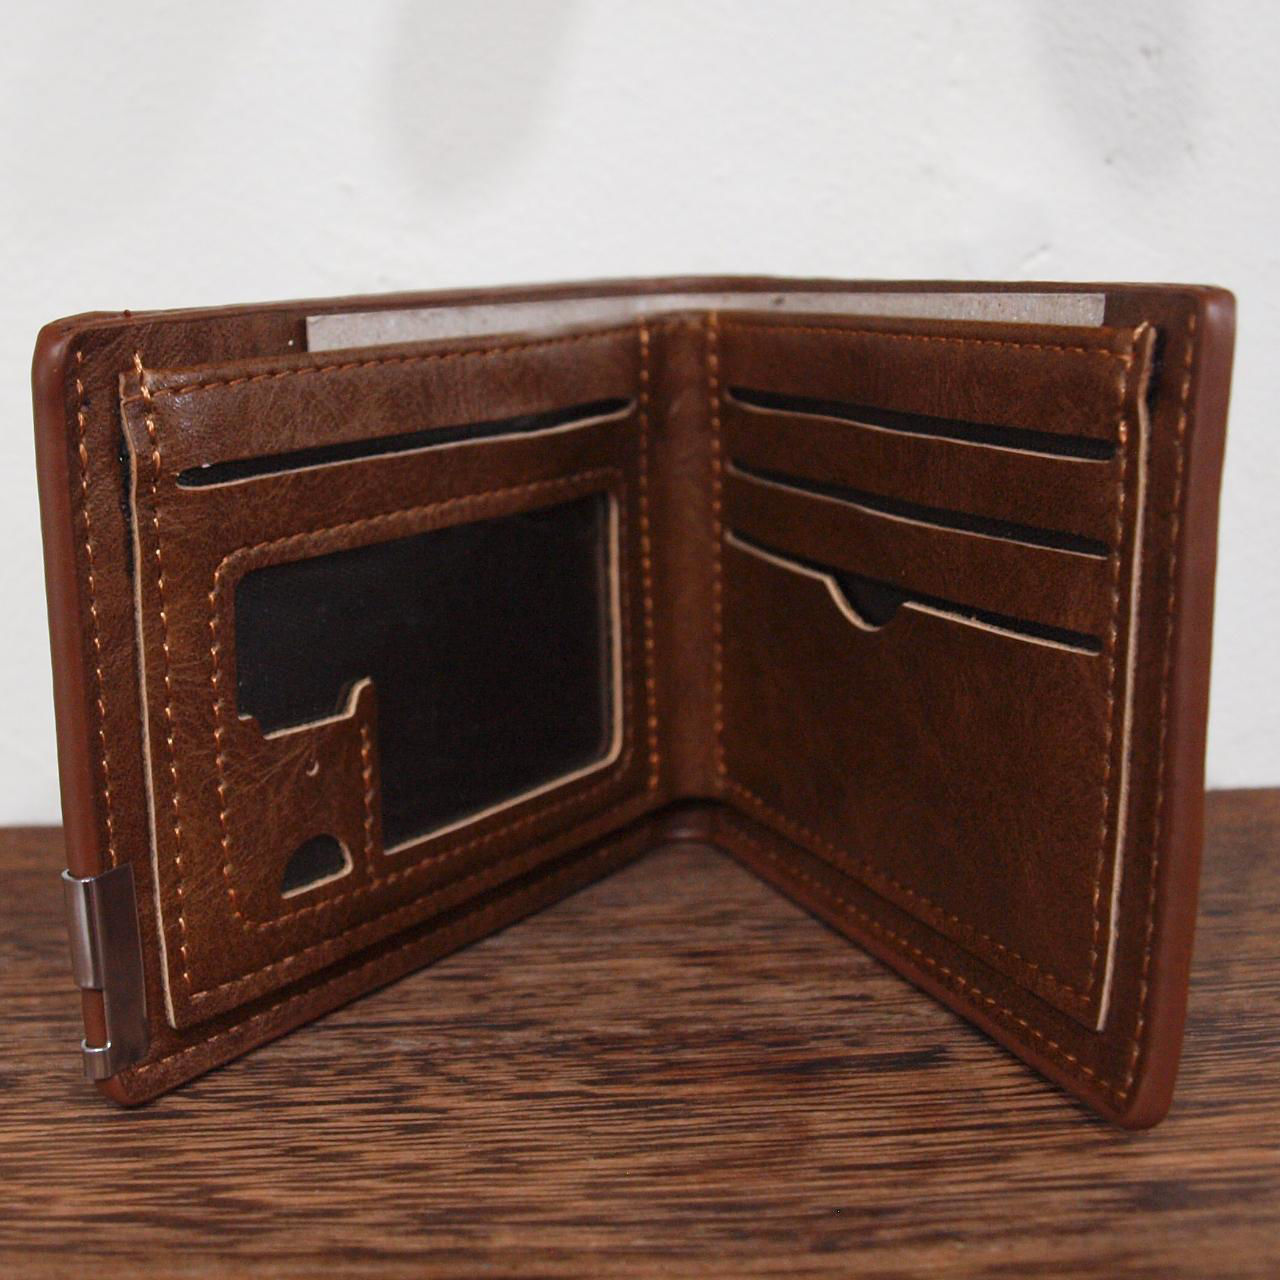 mens-leather-wallet-in-brown